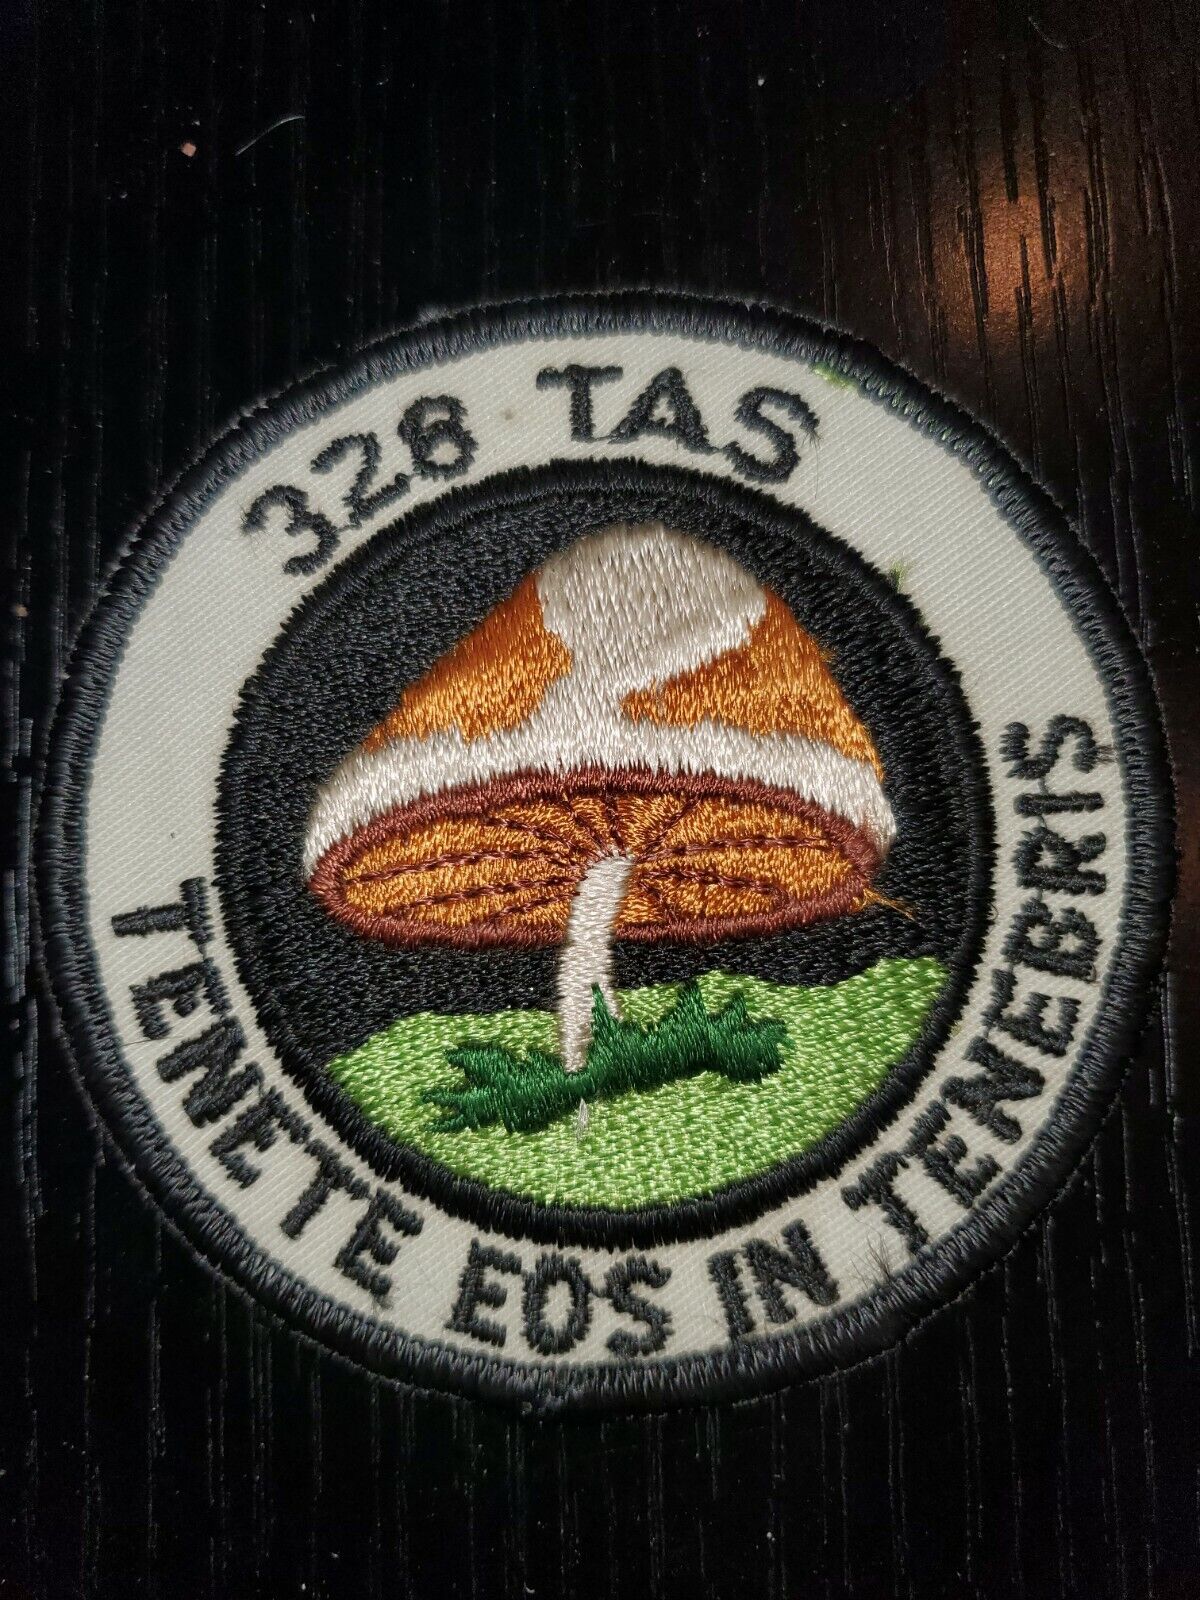 1960s 70s Usaf Air Force 328th Tass Squadron Patch L@@k!!!